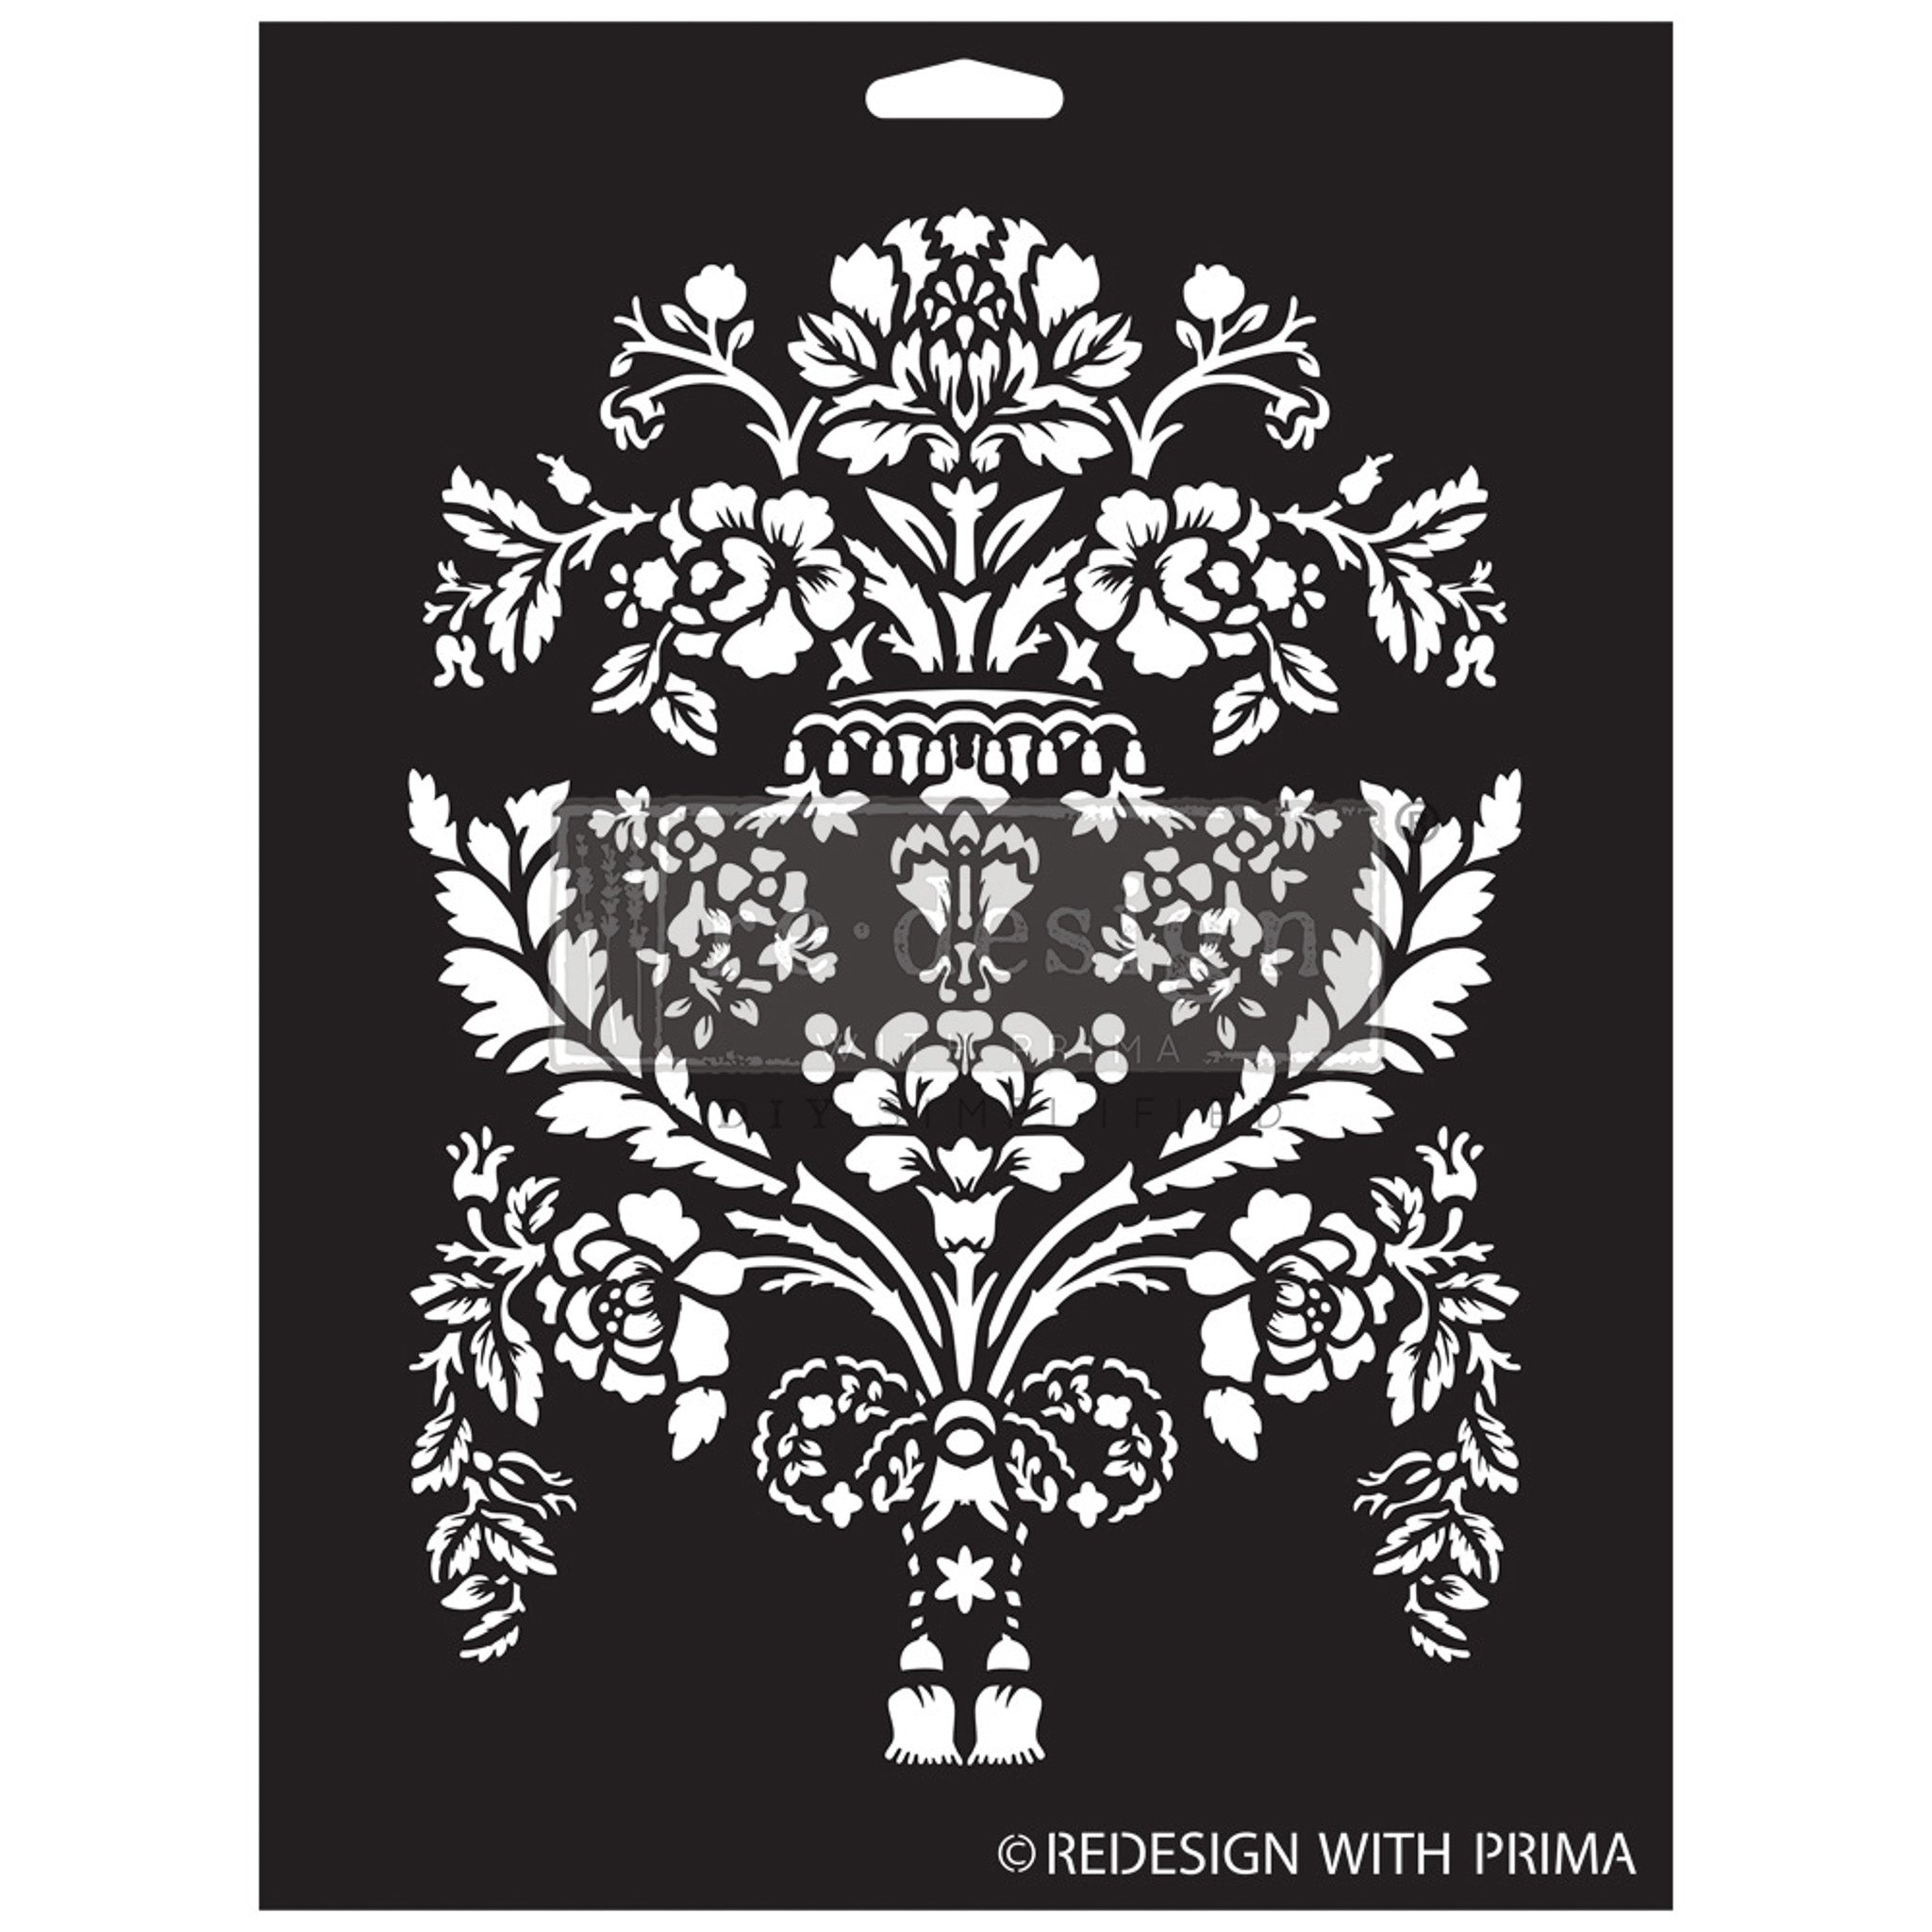 A black stencil against a white background that features a floral design with foliage in the shape of a large European vintage vase.